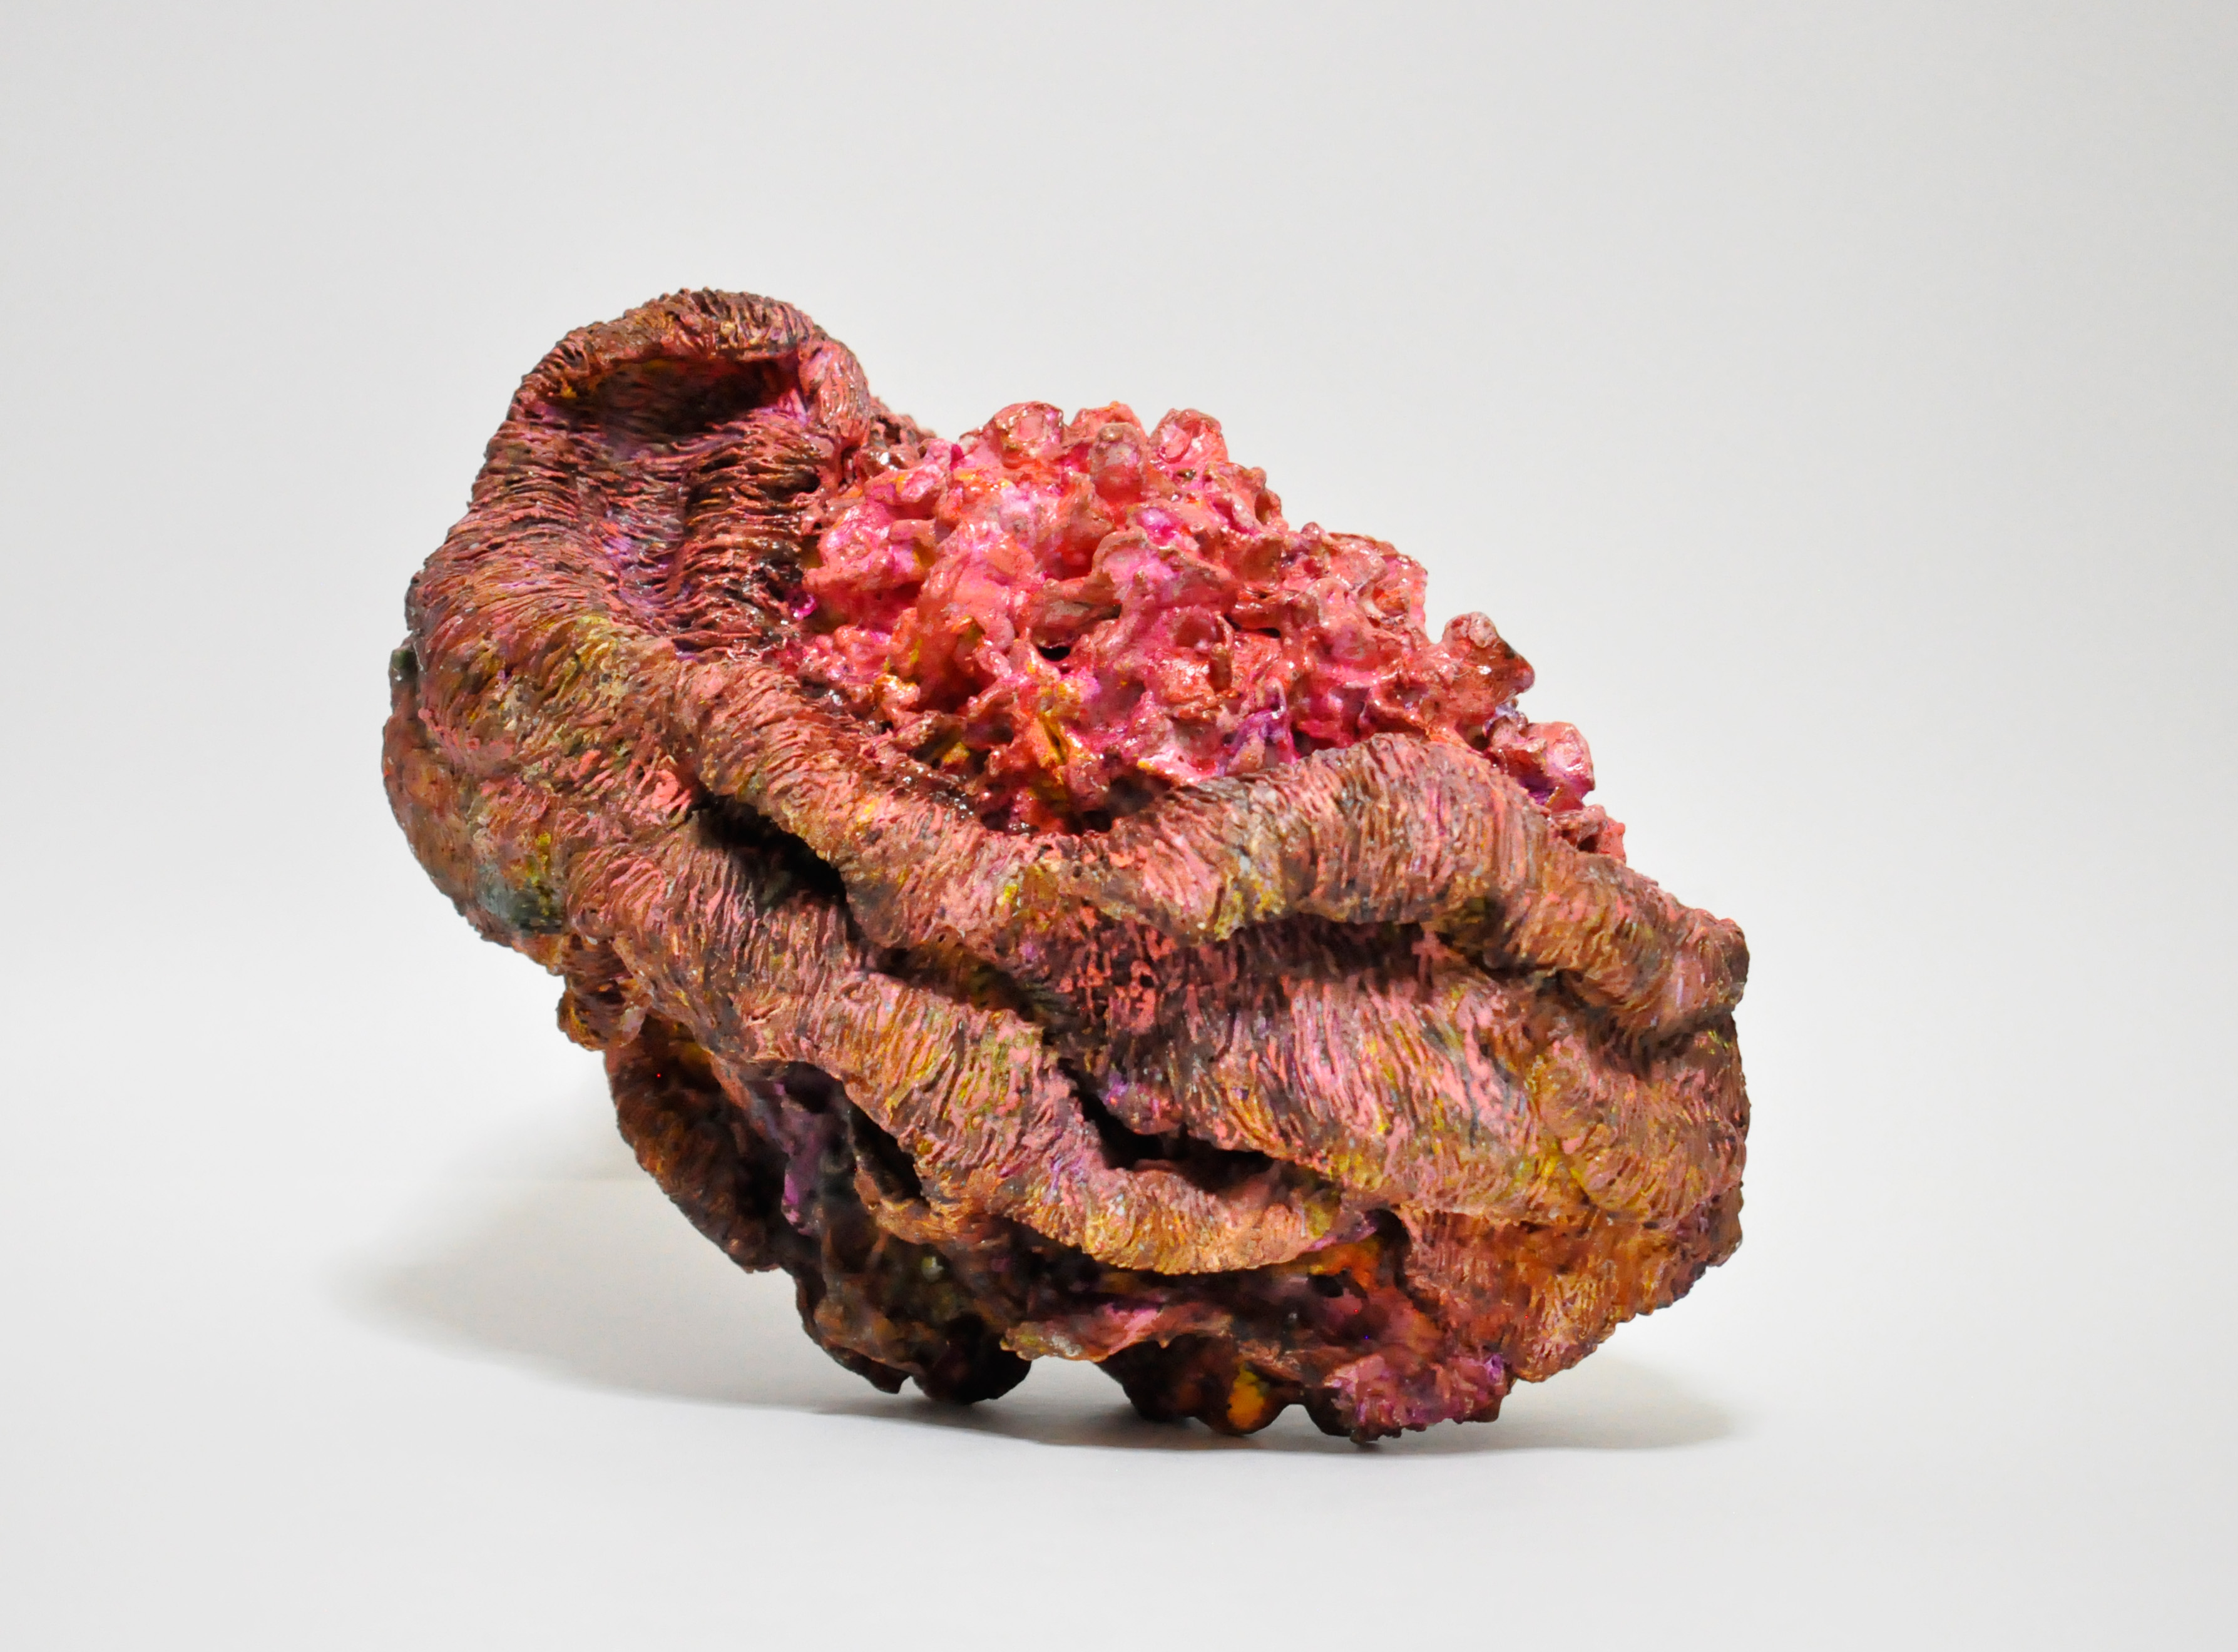 Flower, 2013, Oil and Varnish on Clay, 11.81 x 13.58 x 9.84 in. / 30 x 34.5 x 25 cm [#SS13SC018]